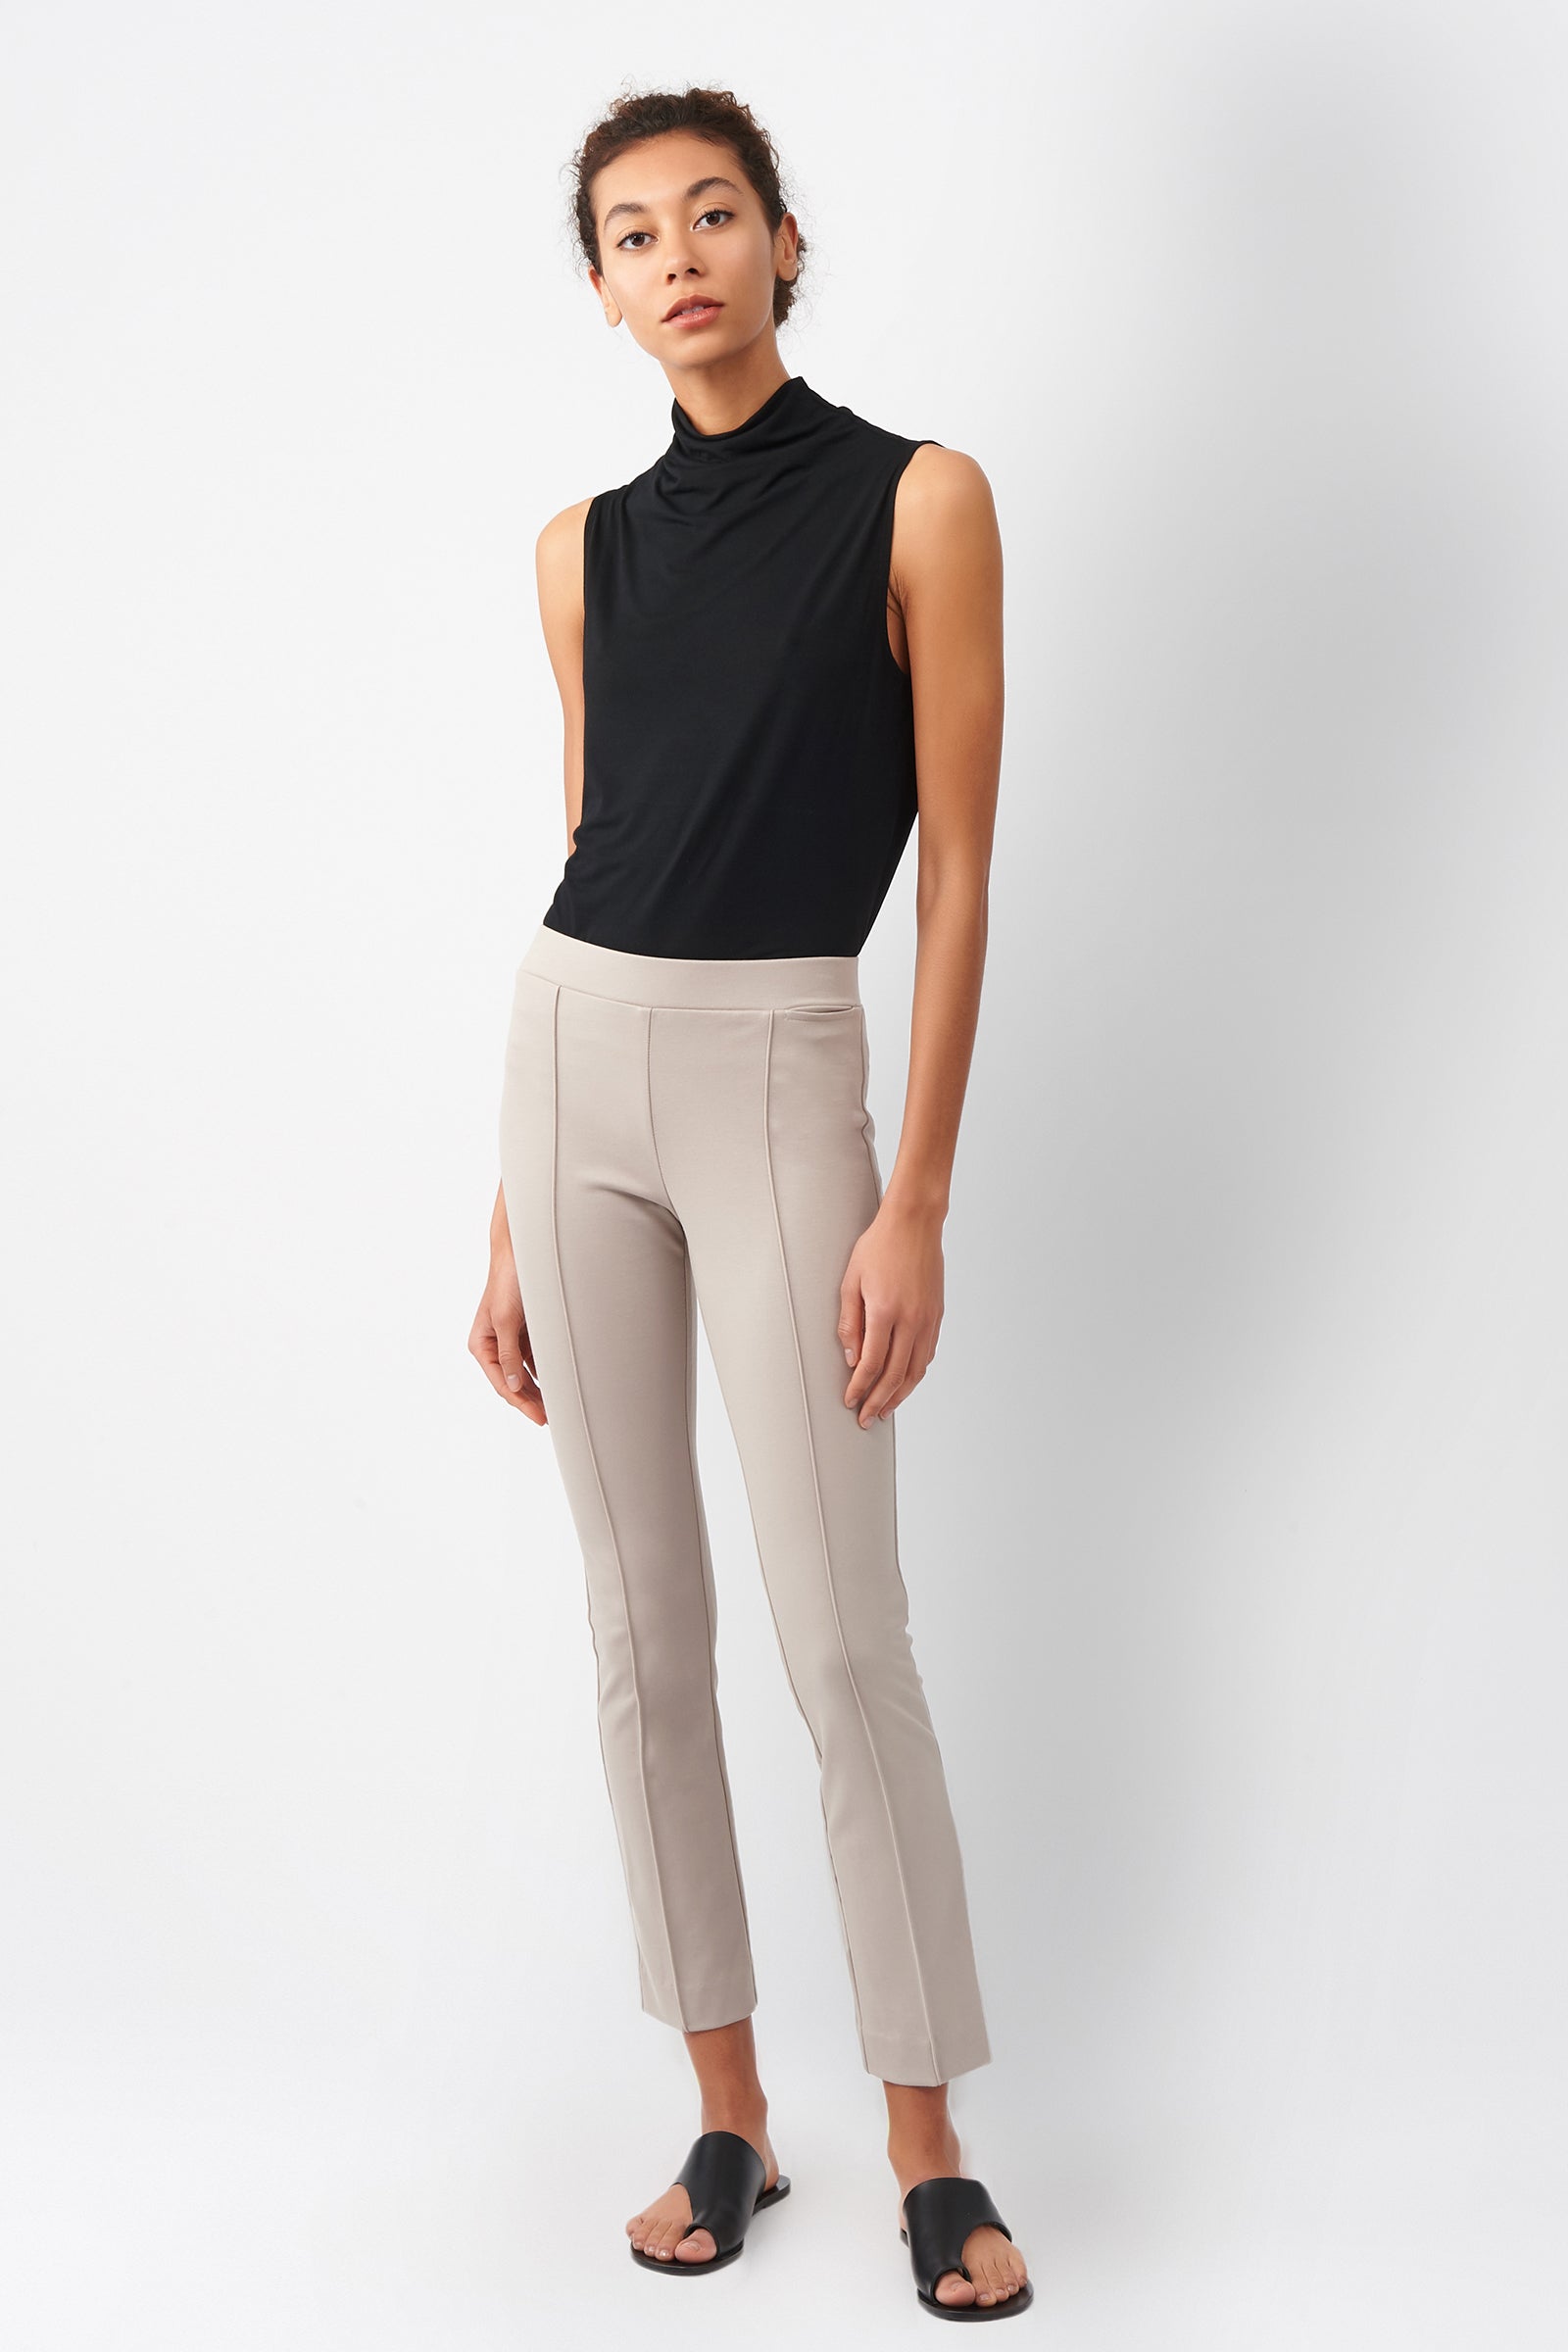 Calessa Ponte Ankle Length High Rise Pull-On Pants